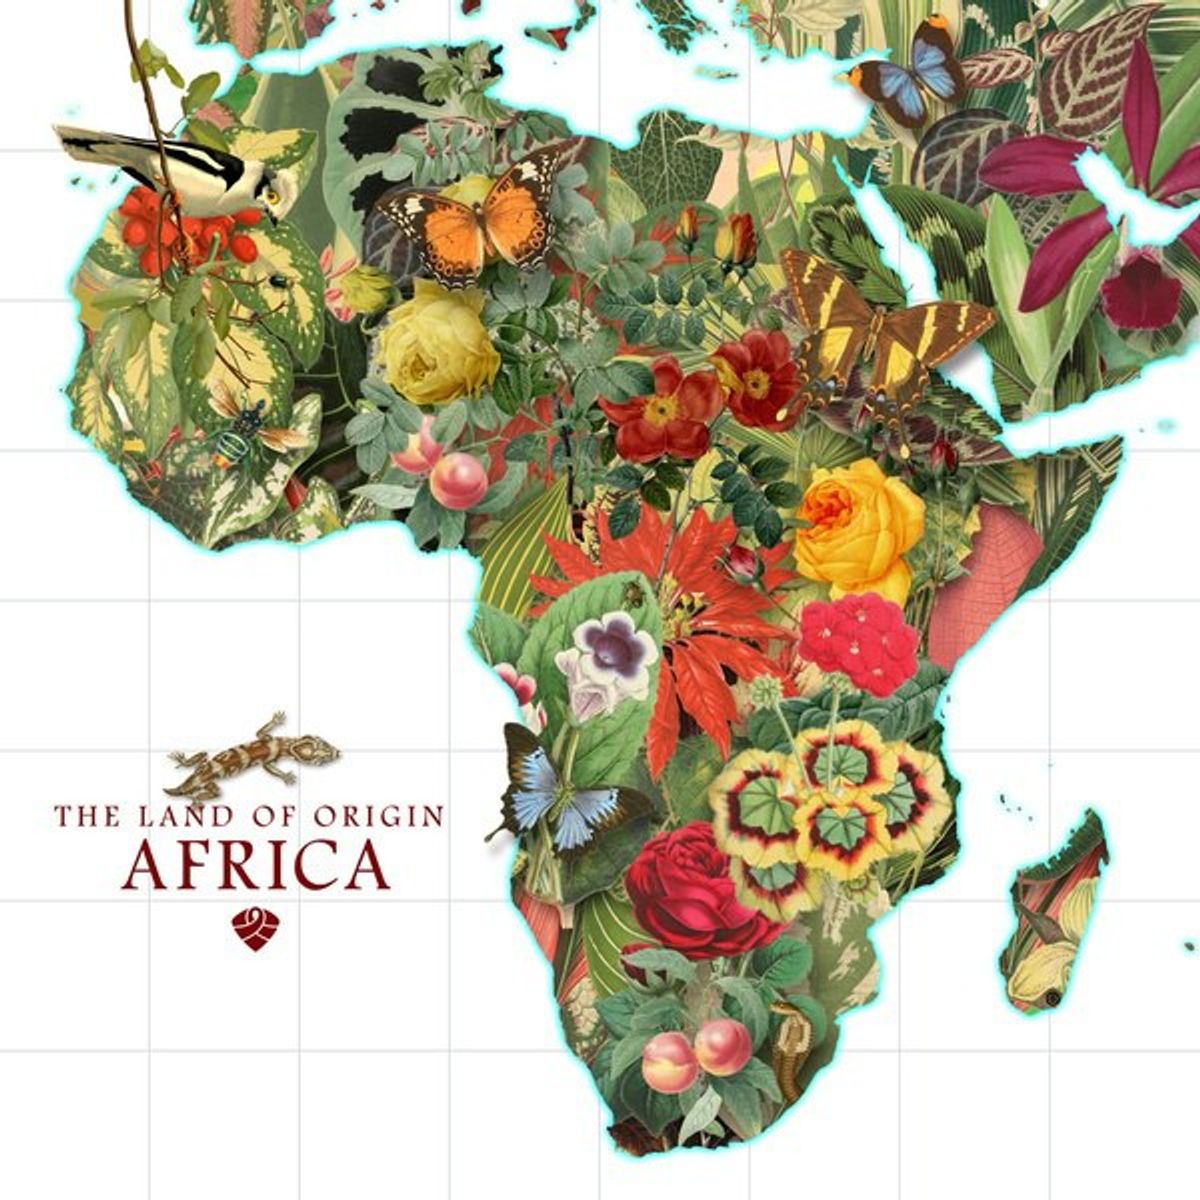 The 'Africa' I Know